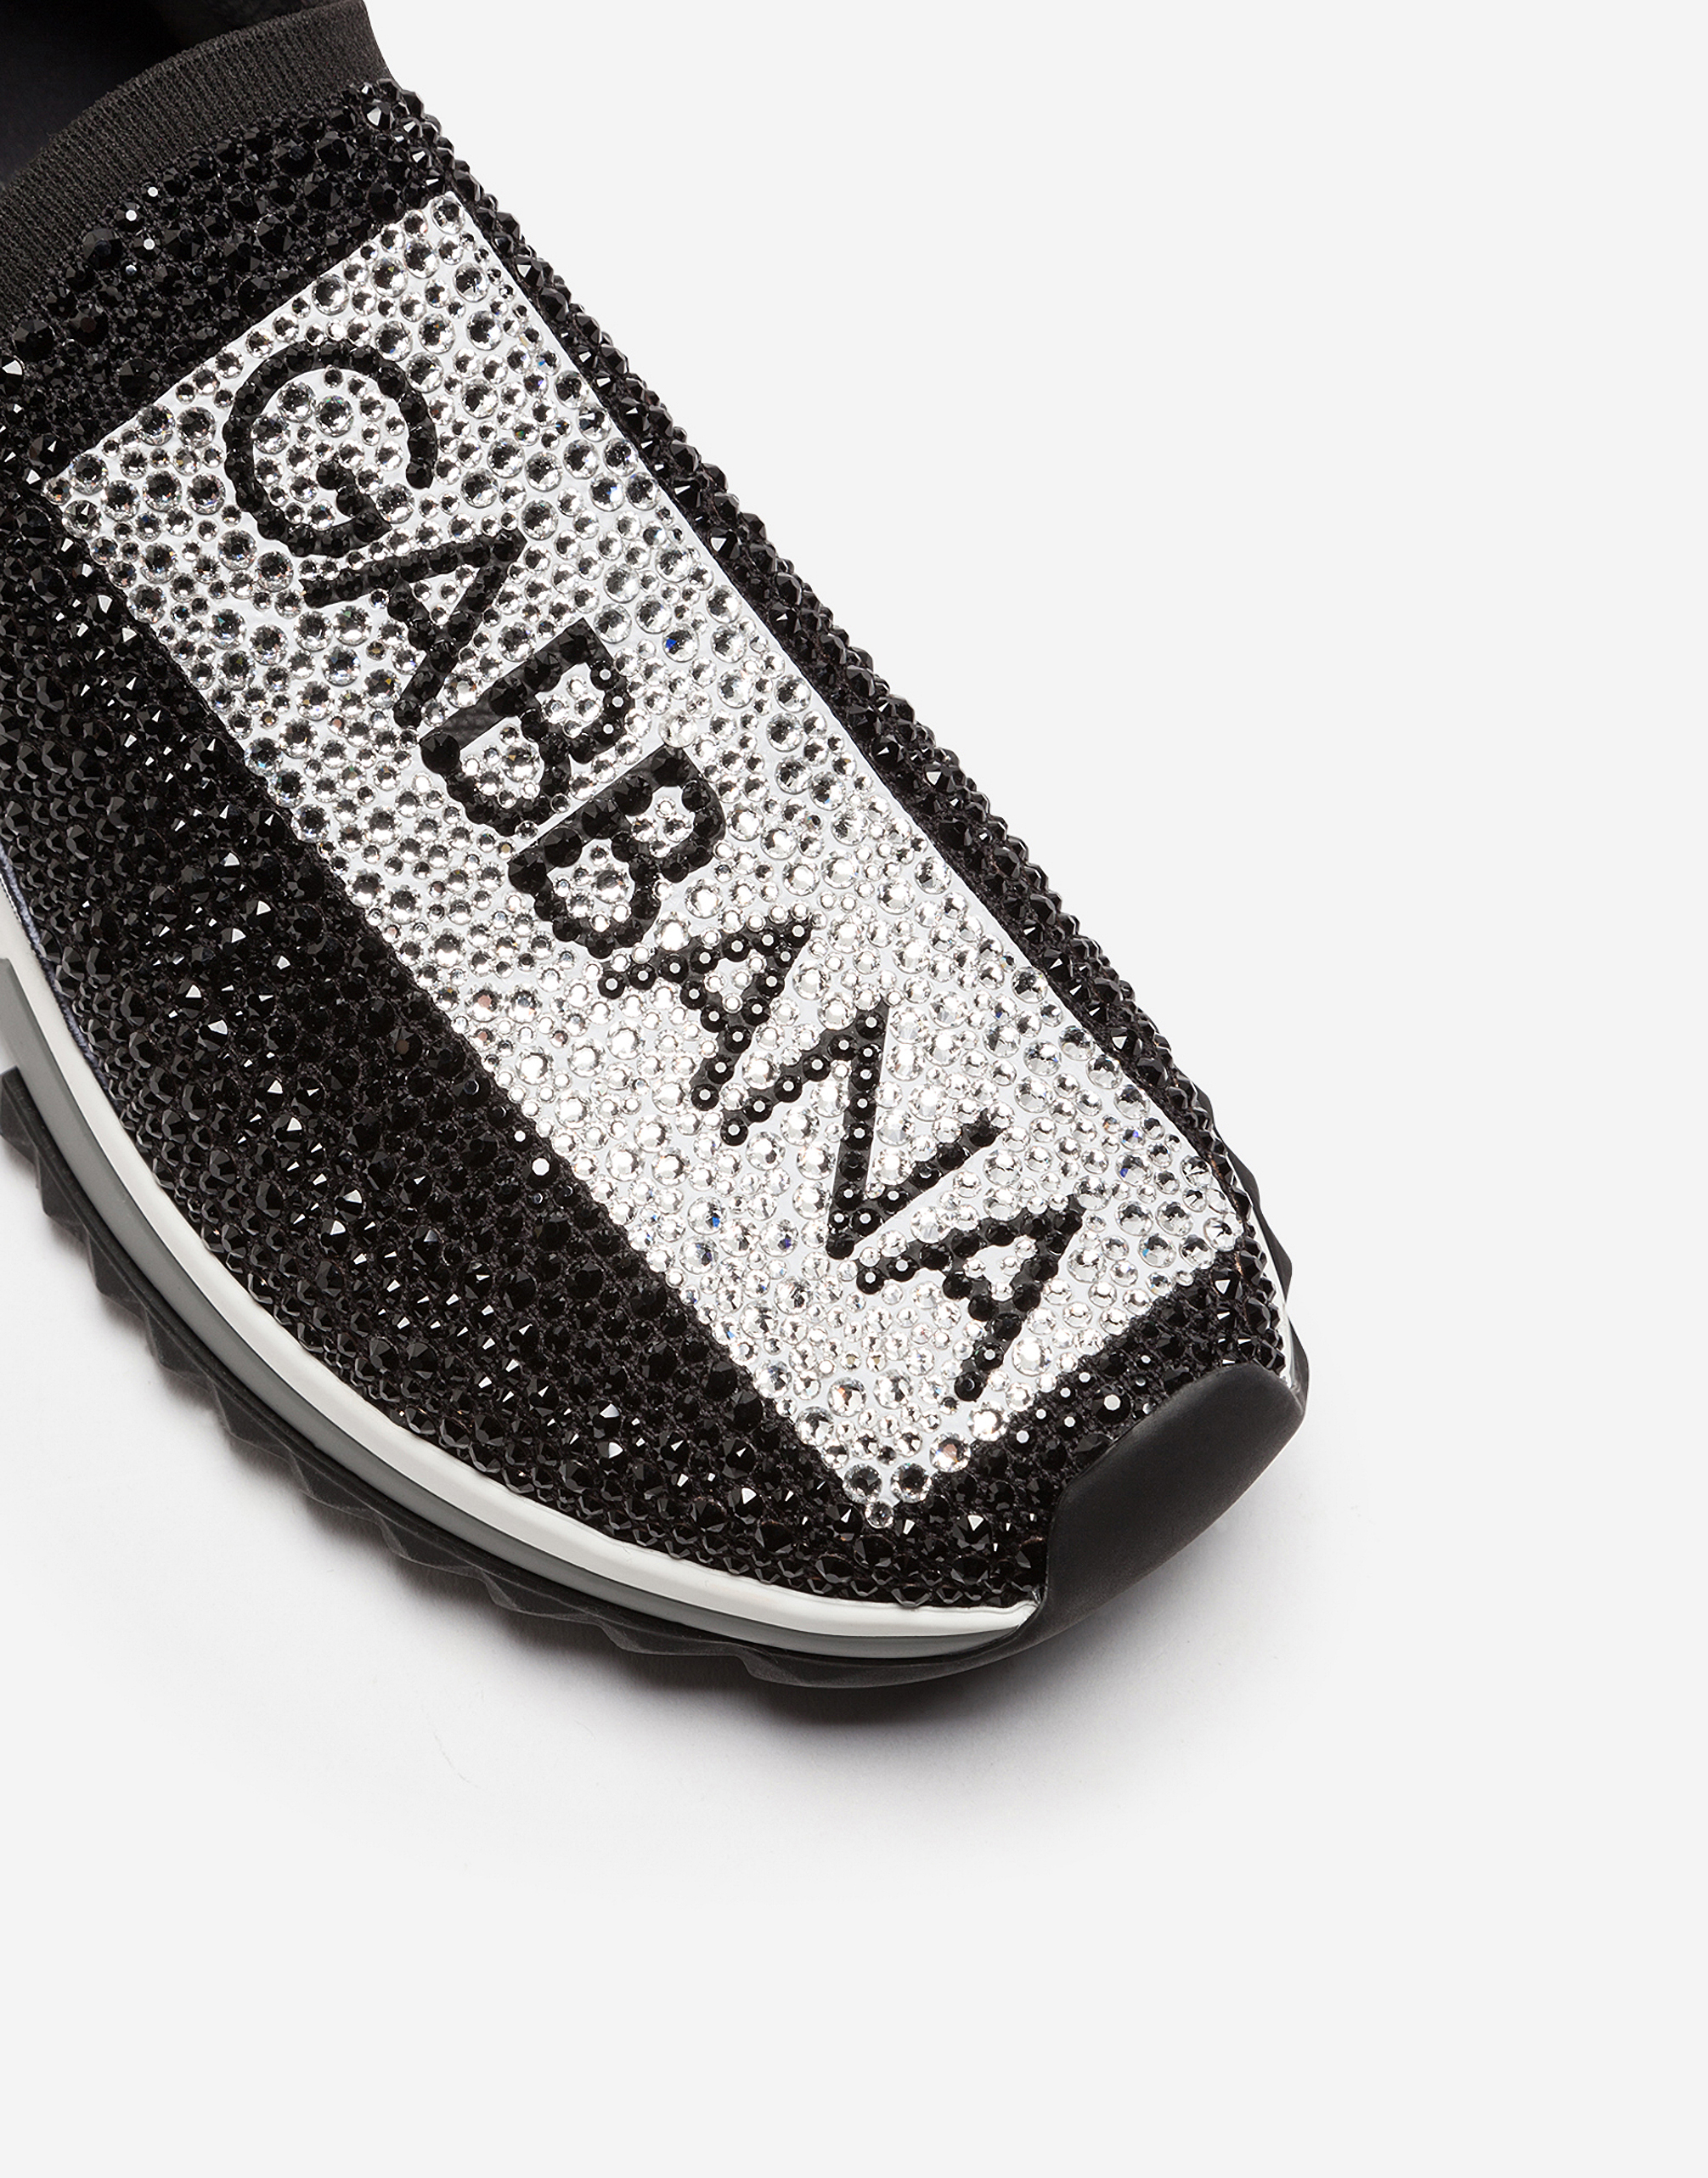 dolce and gabbana sparkly shoes